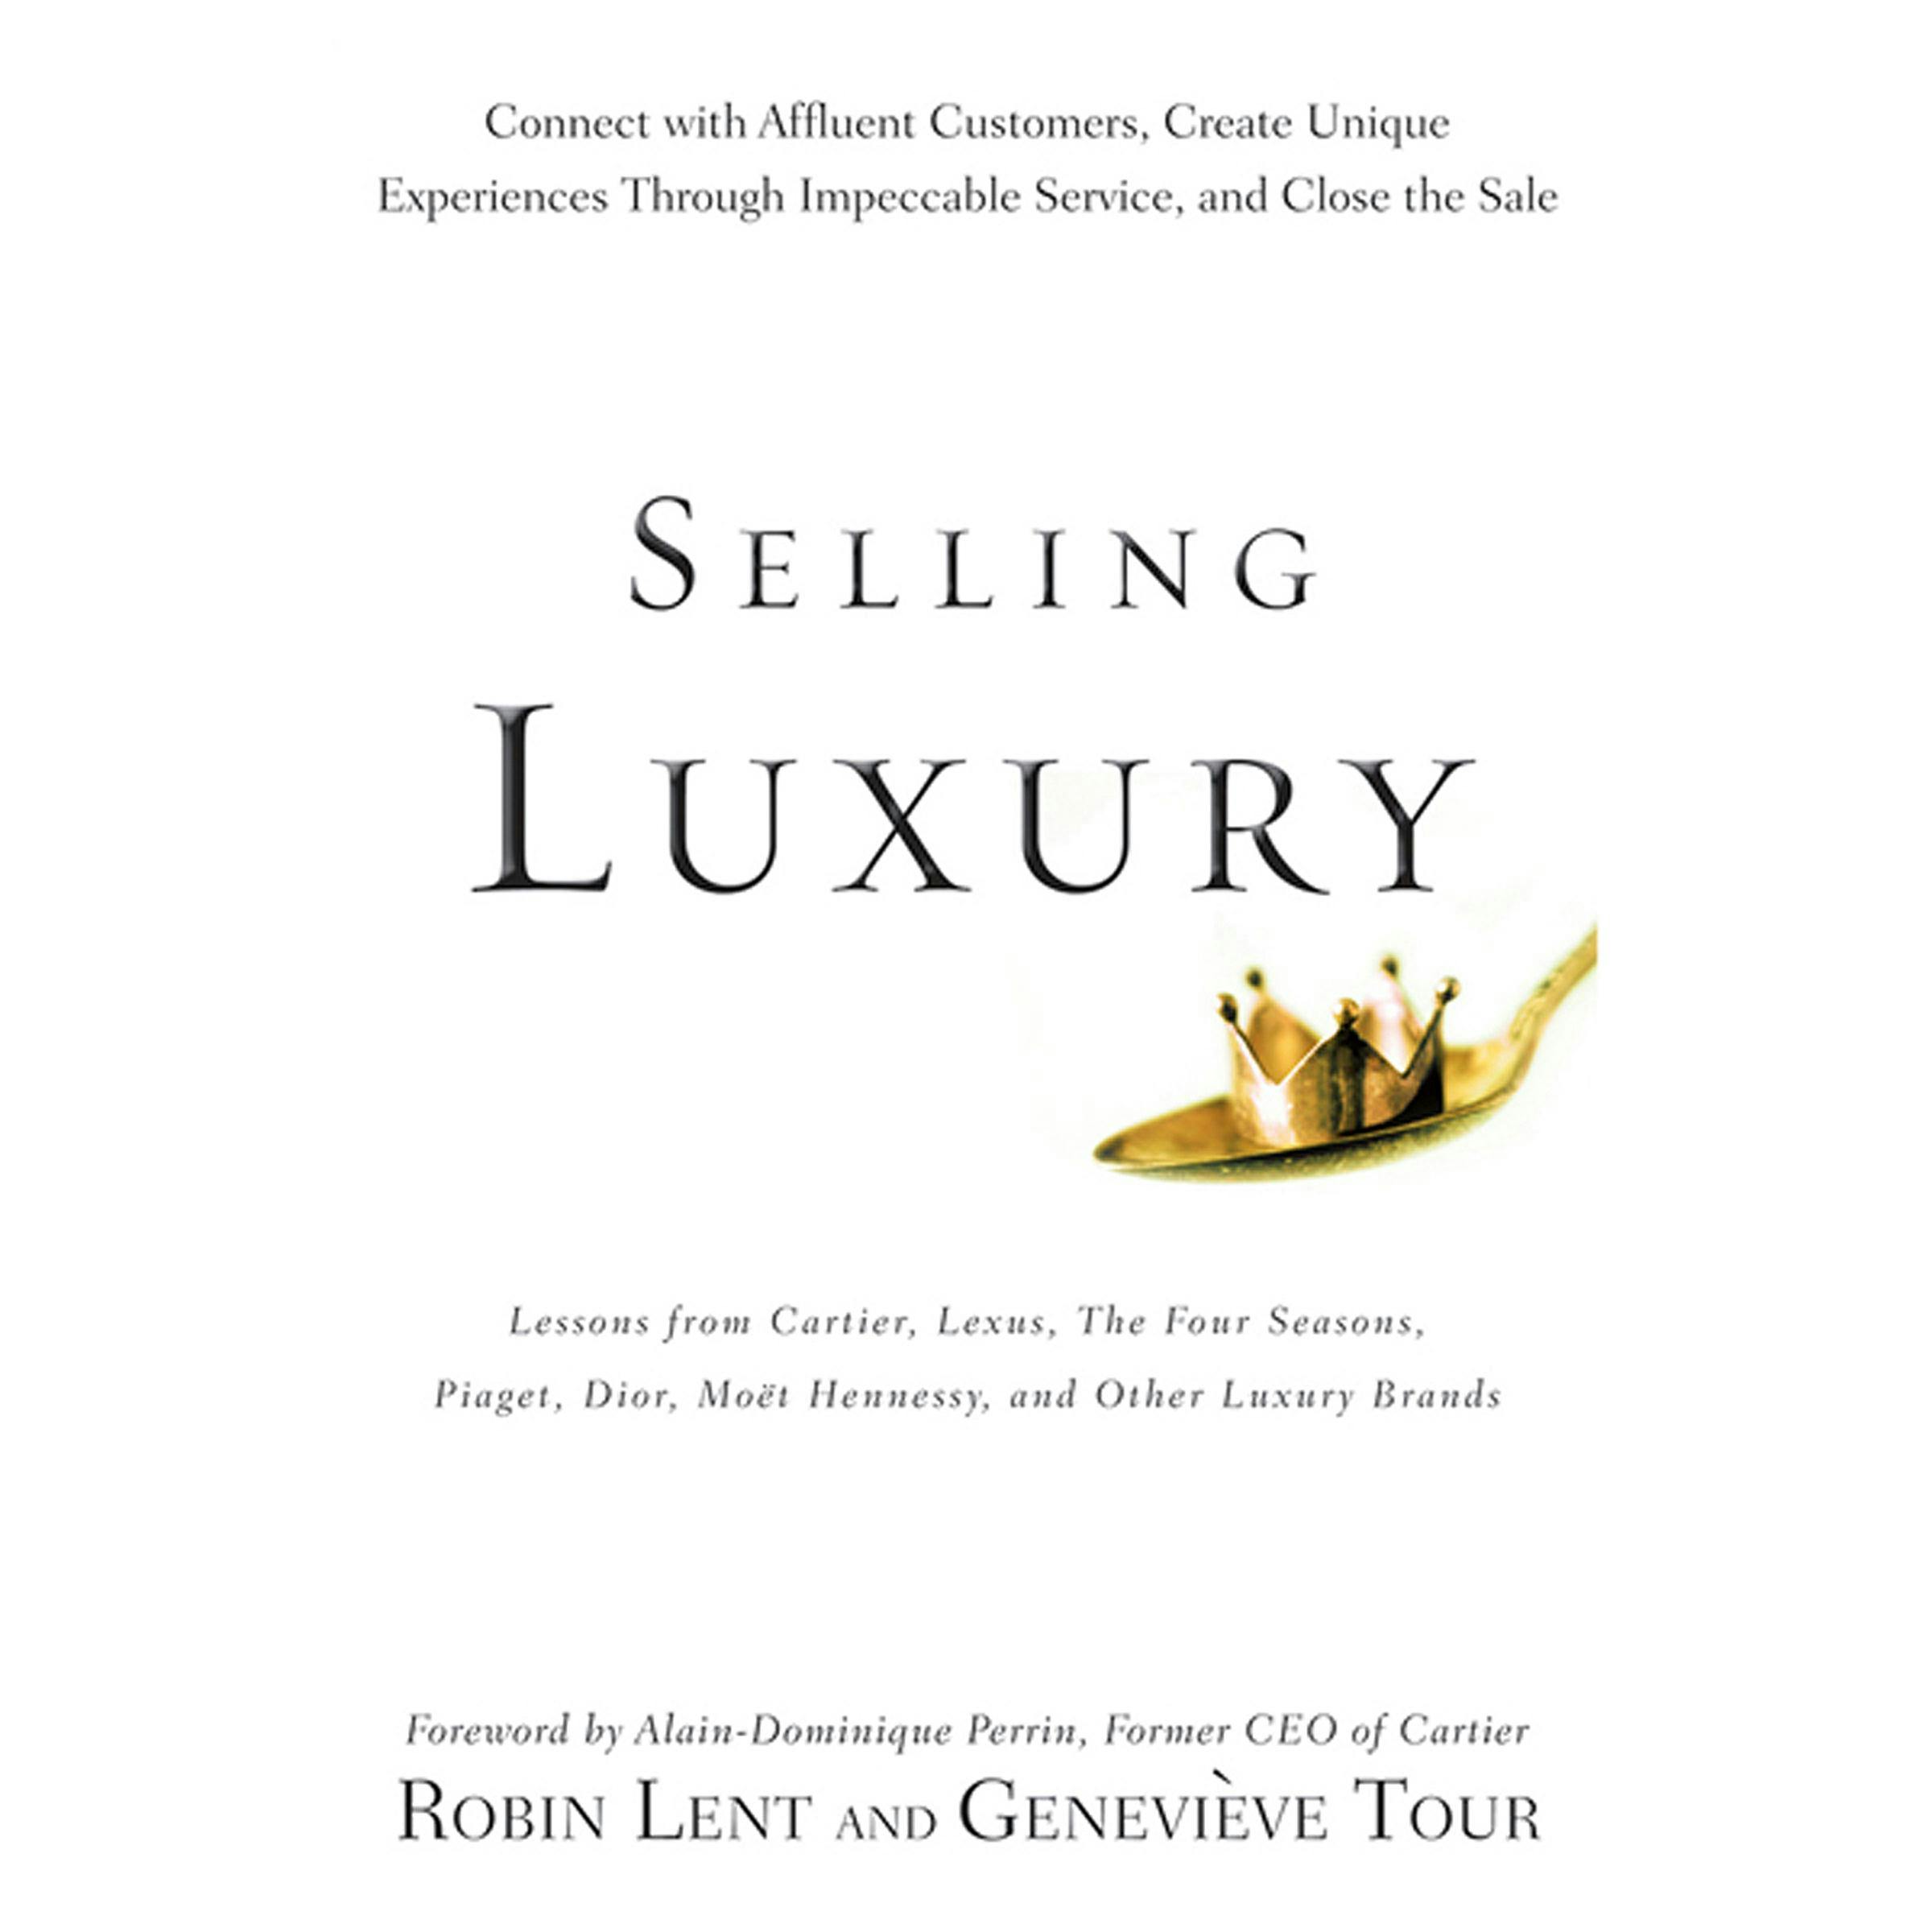 Selling Luxury: Connect with Affluent Customers, Create Unique Experiences Through Impeccable Service, and Close the Sale - Genevieve Tour, Alain-Dominique Perrin, Robin Lent